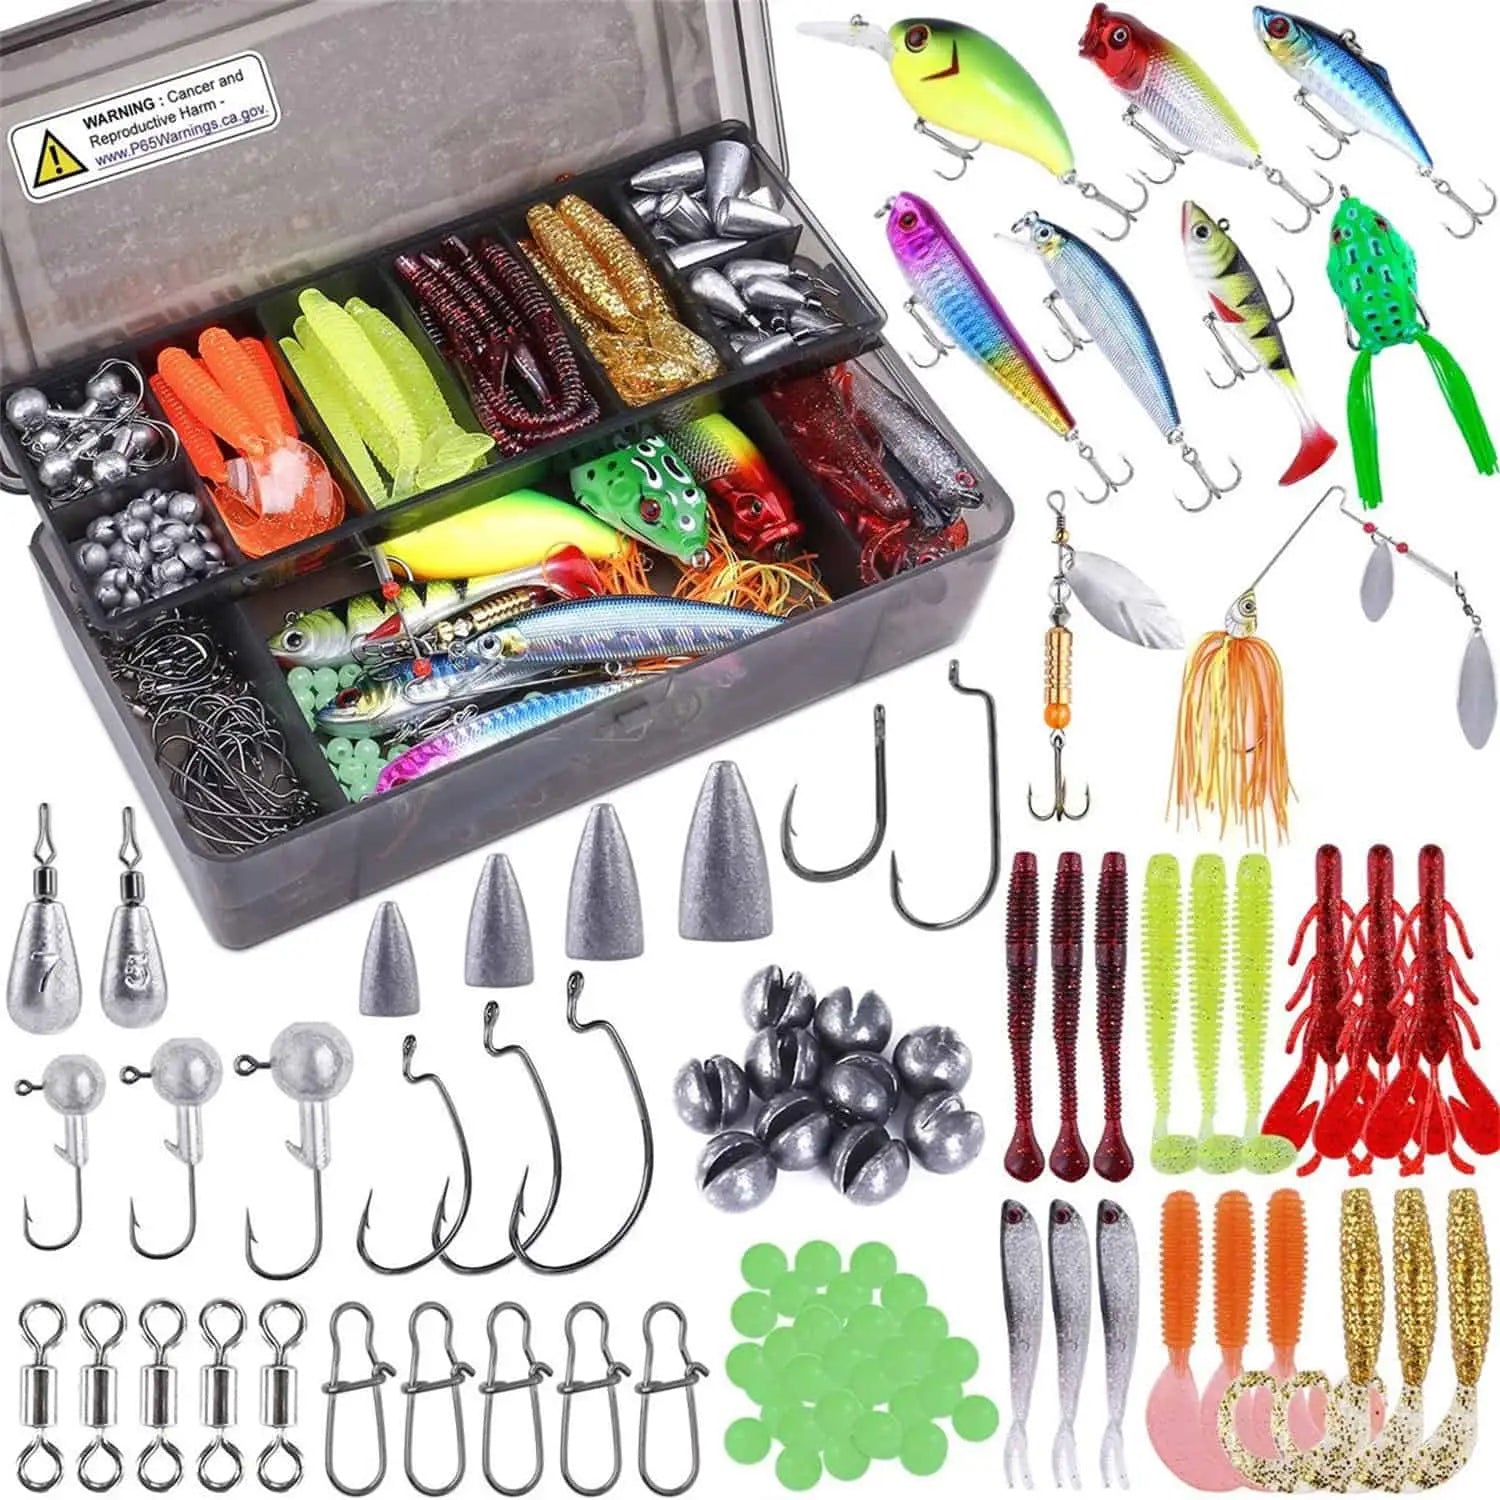  PLUSINNO 253pcs Fishing Accessories Kit, Fishing Tackle Box  with Tackle Included, Fishing Hooks, Fishing Weights Sinkers, Spinner  Blade, Fishing Gear for Bass, Bluegill, Crappie, Fishing : Sports & Outdoors